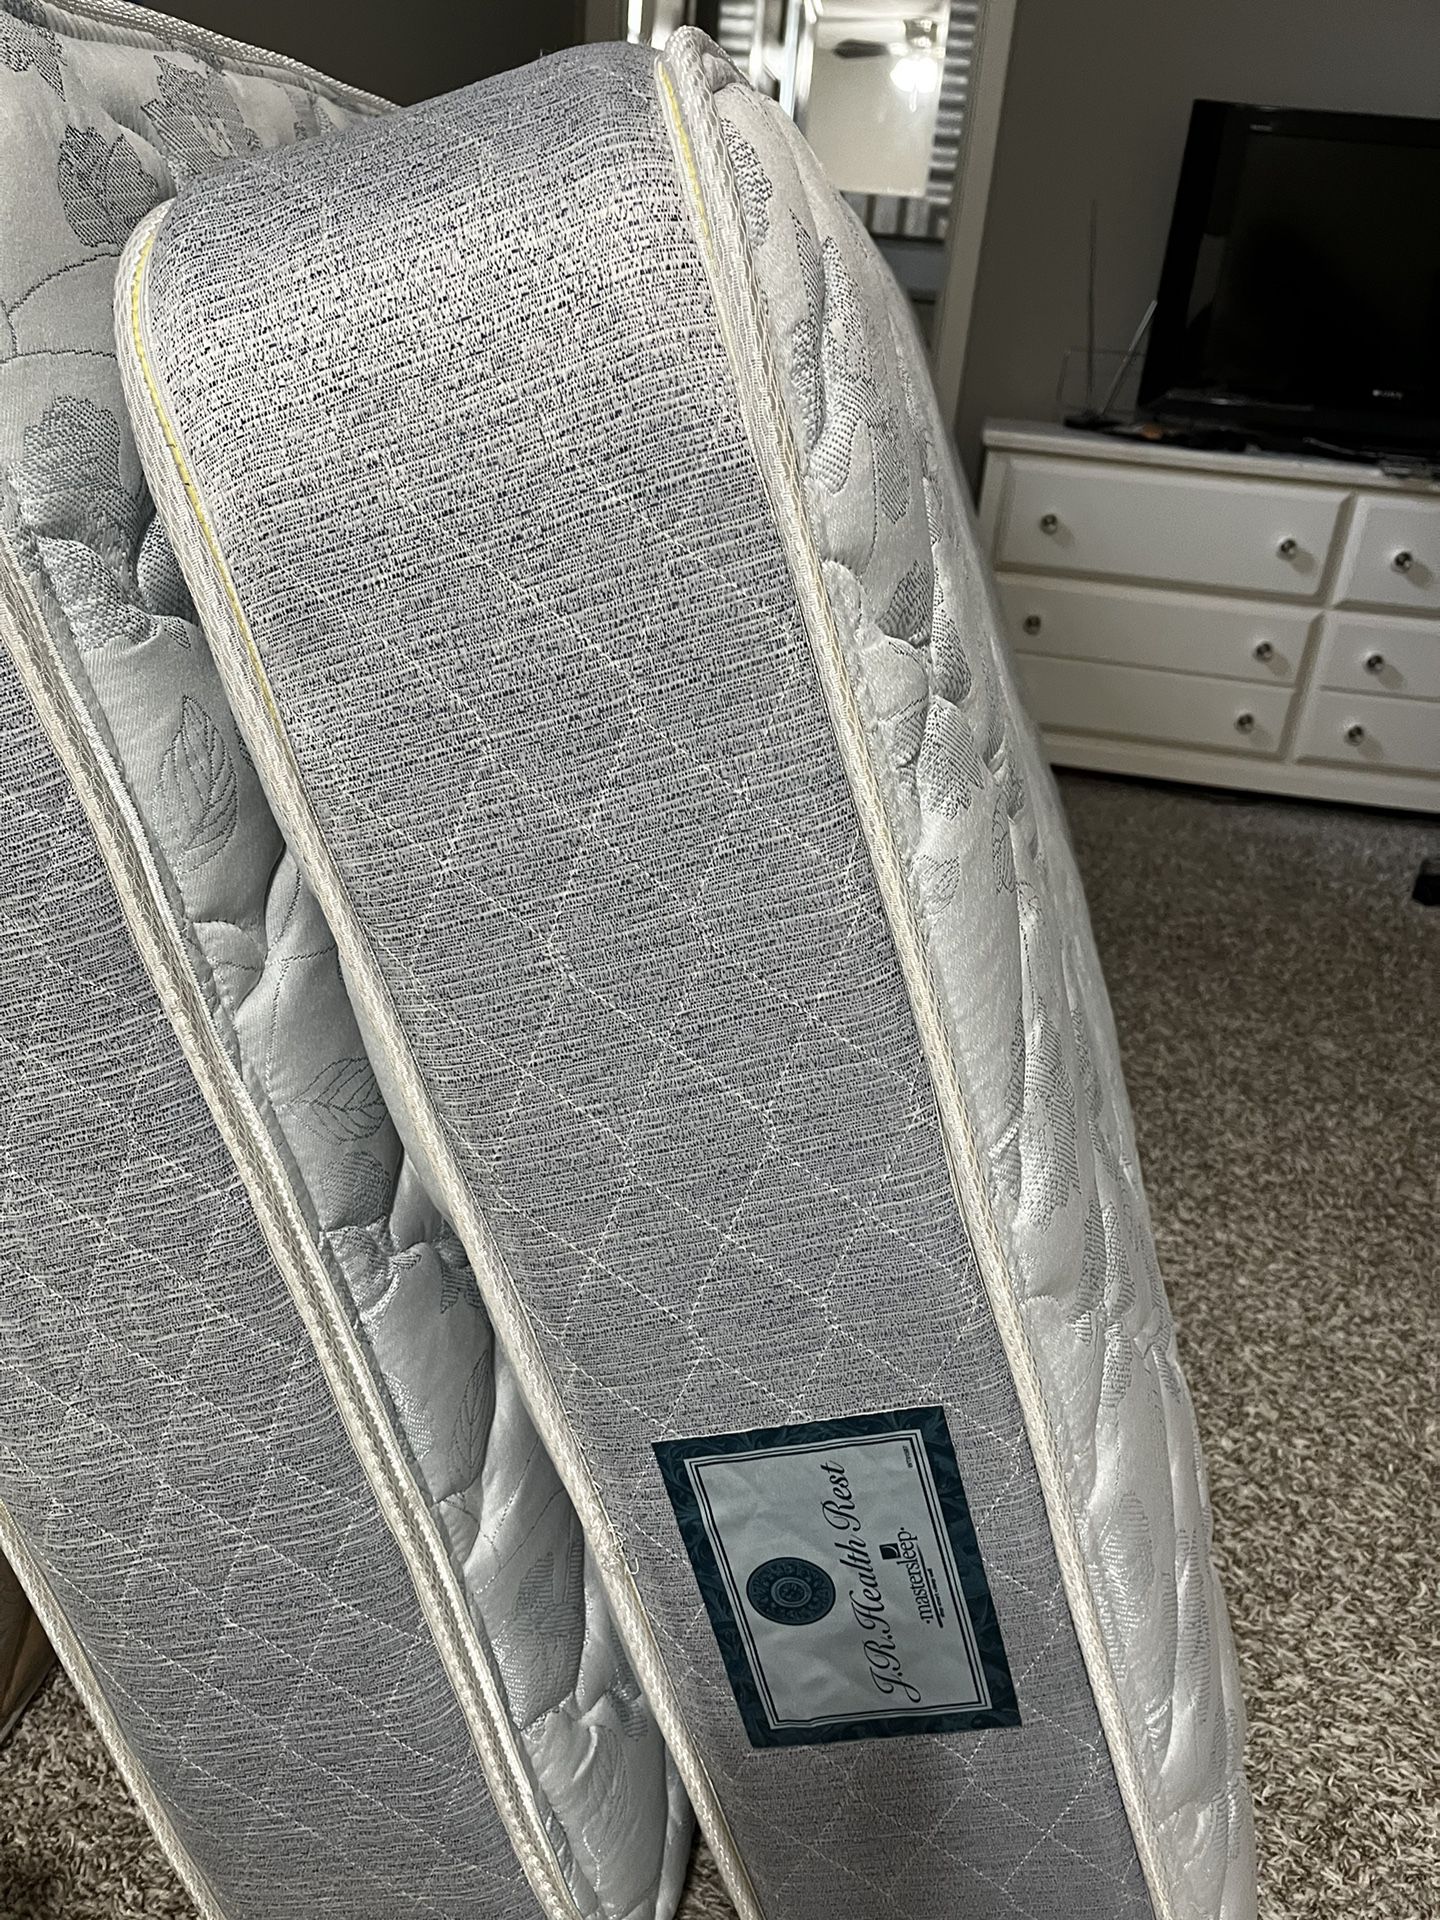 Twin Mattress In Good Condition For $59